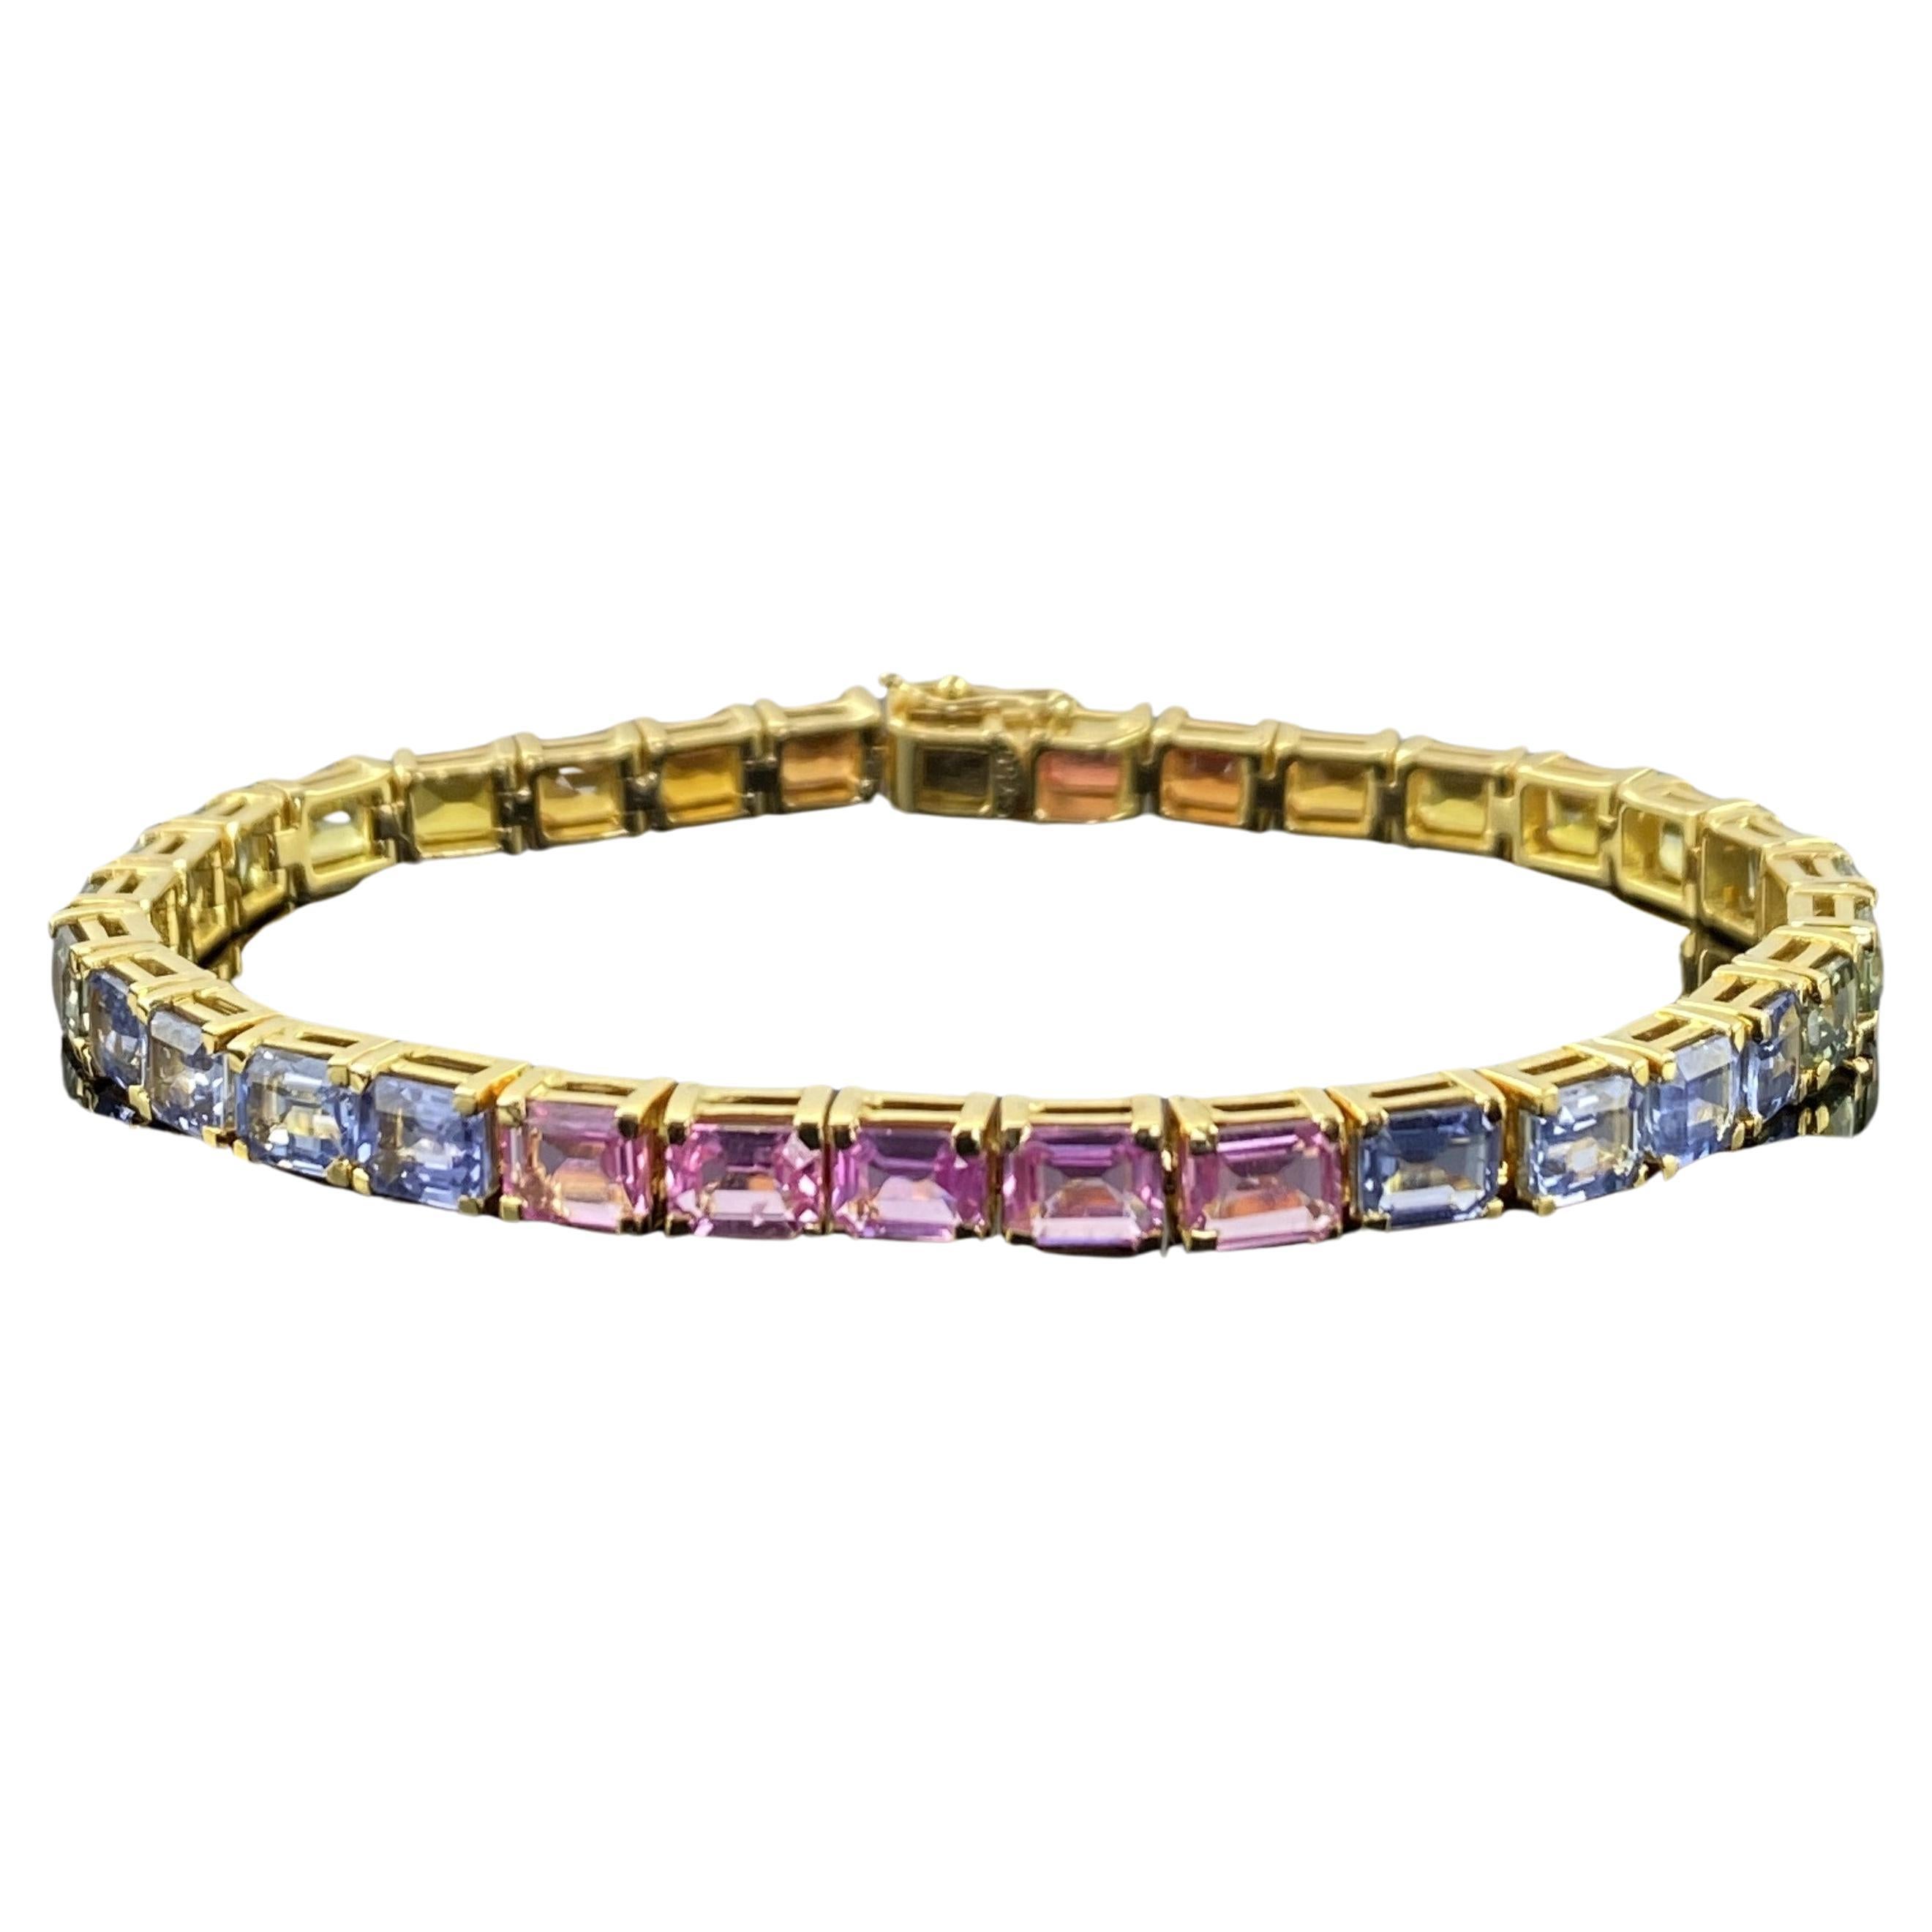 A beautiful 12.89 carat emerald cut multi colored sapphire tennis bracelet, set in 18.11 grams of solid 18K Yellow Gold. Currently the bracelet is 7 inches long, can be altered. 
Please feel free to message us for more information